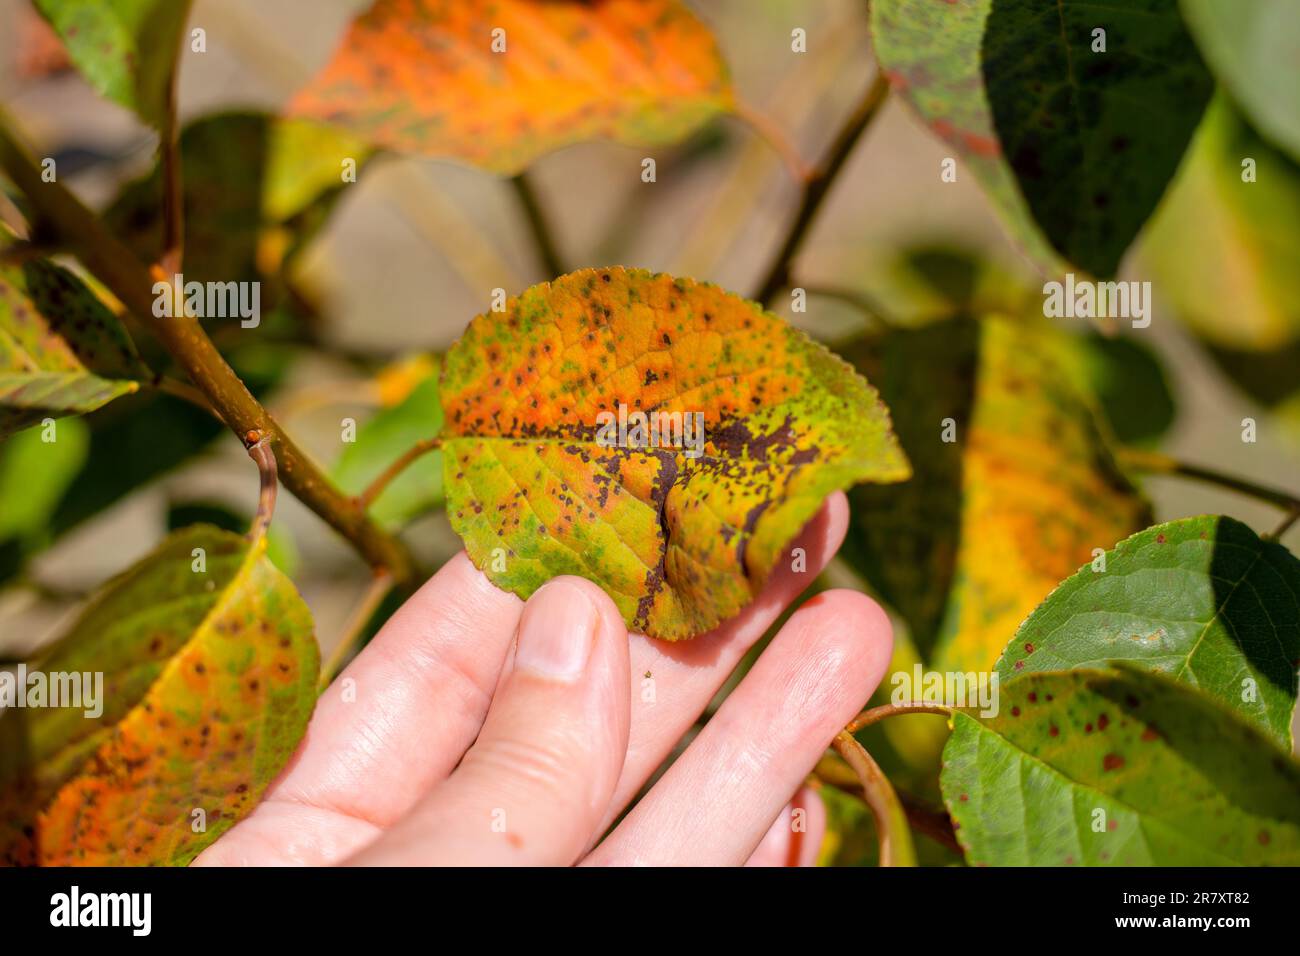 A gardener examines a cherry leaf affected by a fungal disease called coccomycosis. Diseases of plants in the garden. Stock Photo